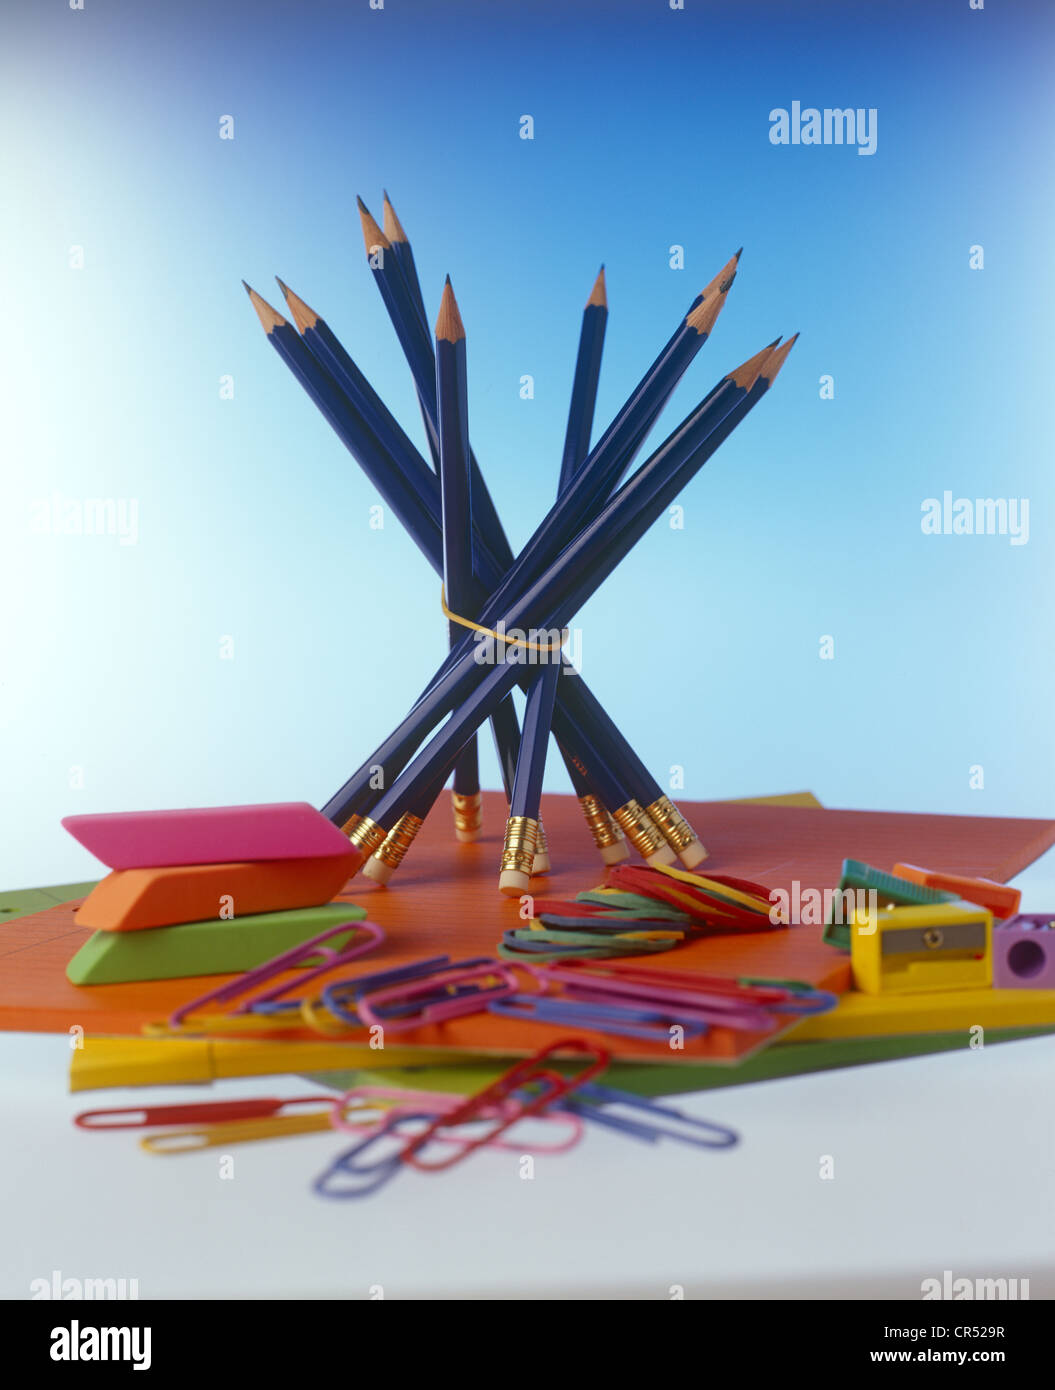 stationary office pencils rubbers sharpeners clips paper Stock Photo